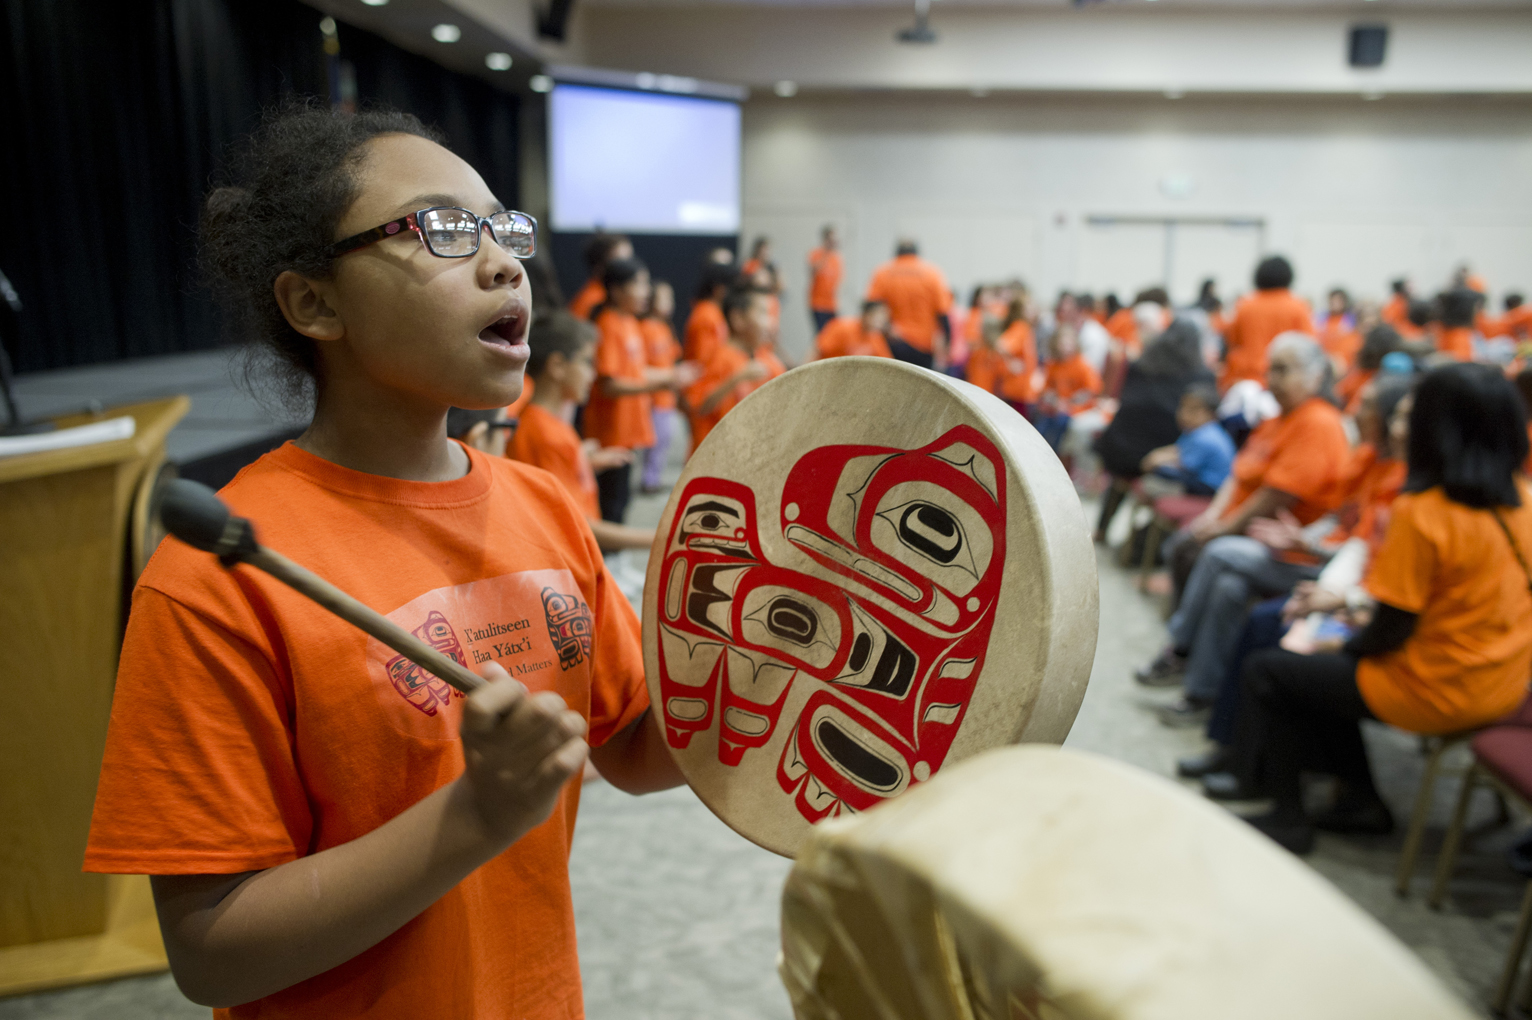 Harborview Elementary School fifth-grader Remi Starks drums during Orange Shirt Day in the Elizabeth Peratrovich Hall on Friday.